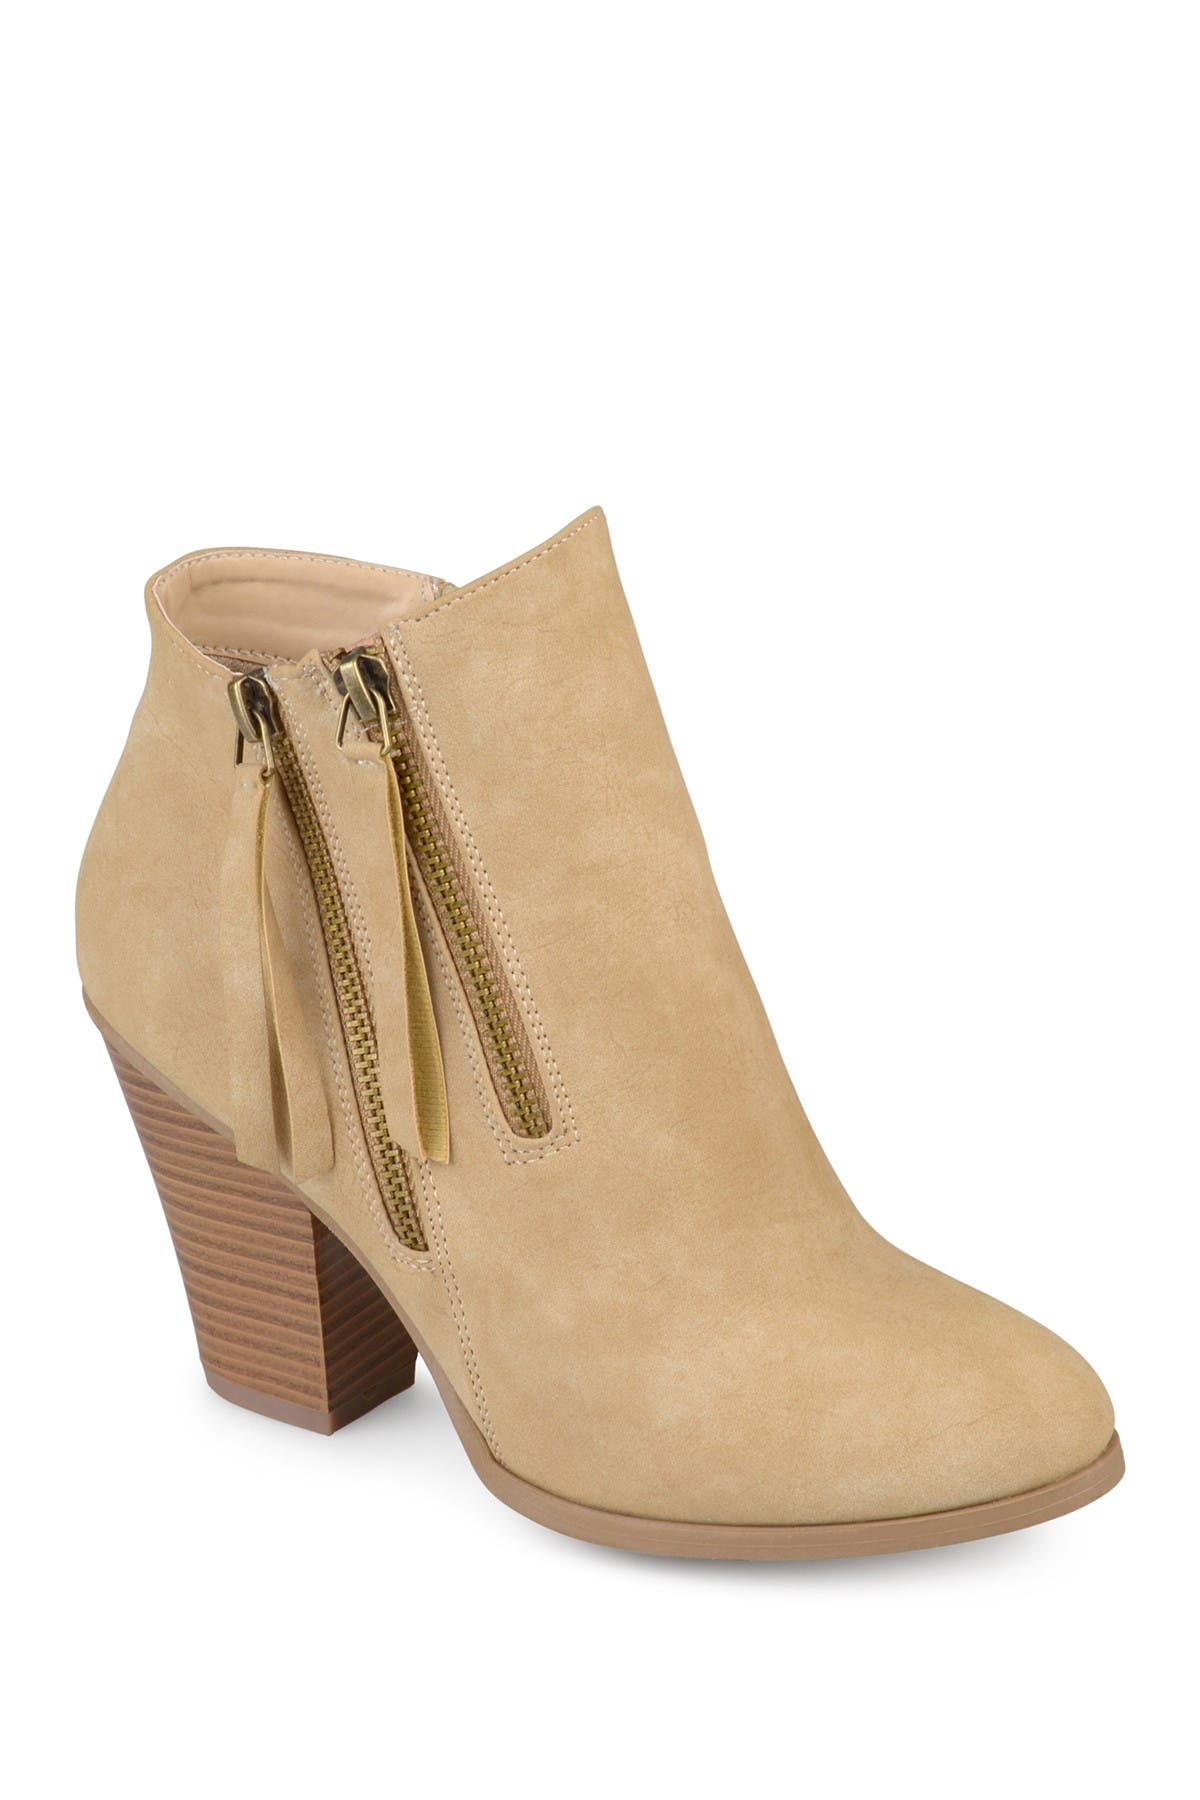 JOURNEE Collection | Vally Bootie 